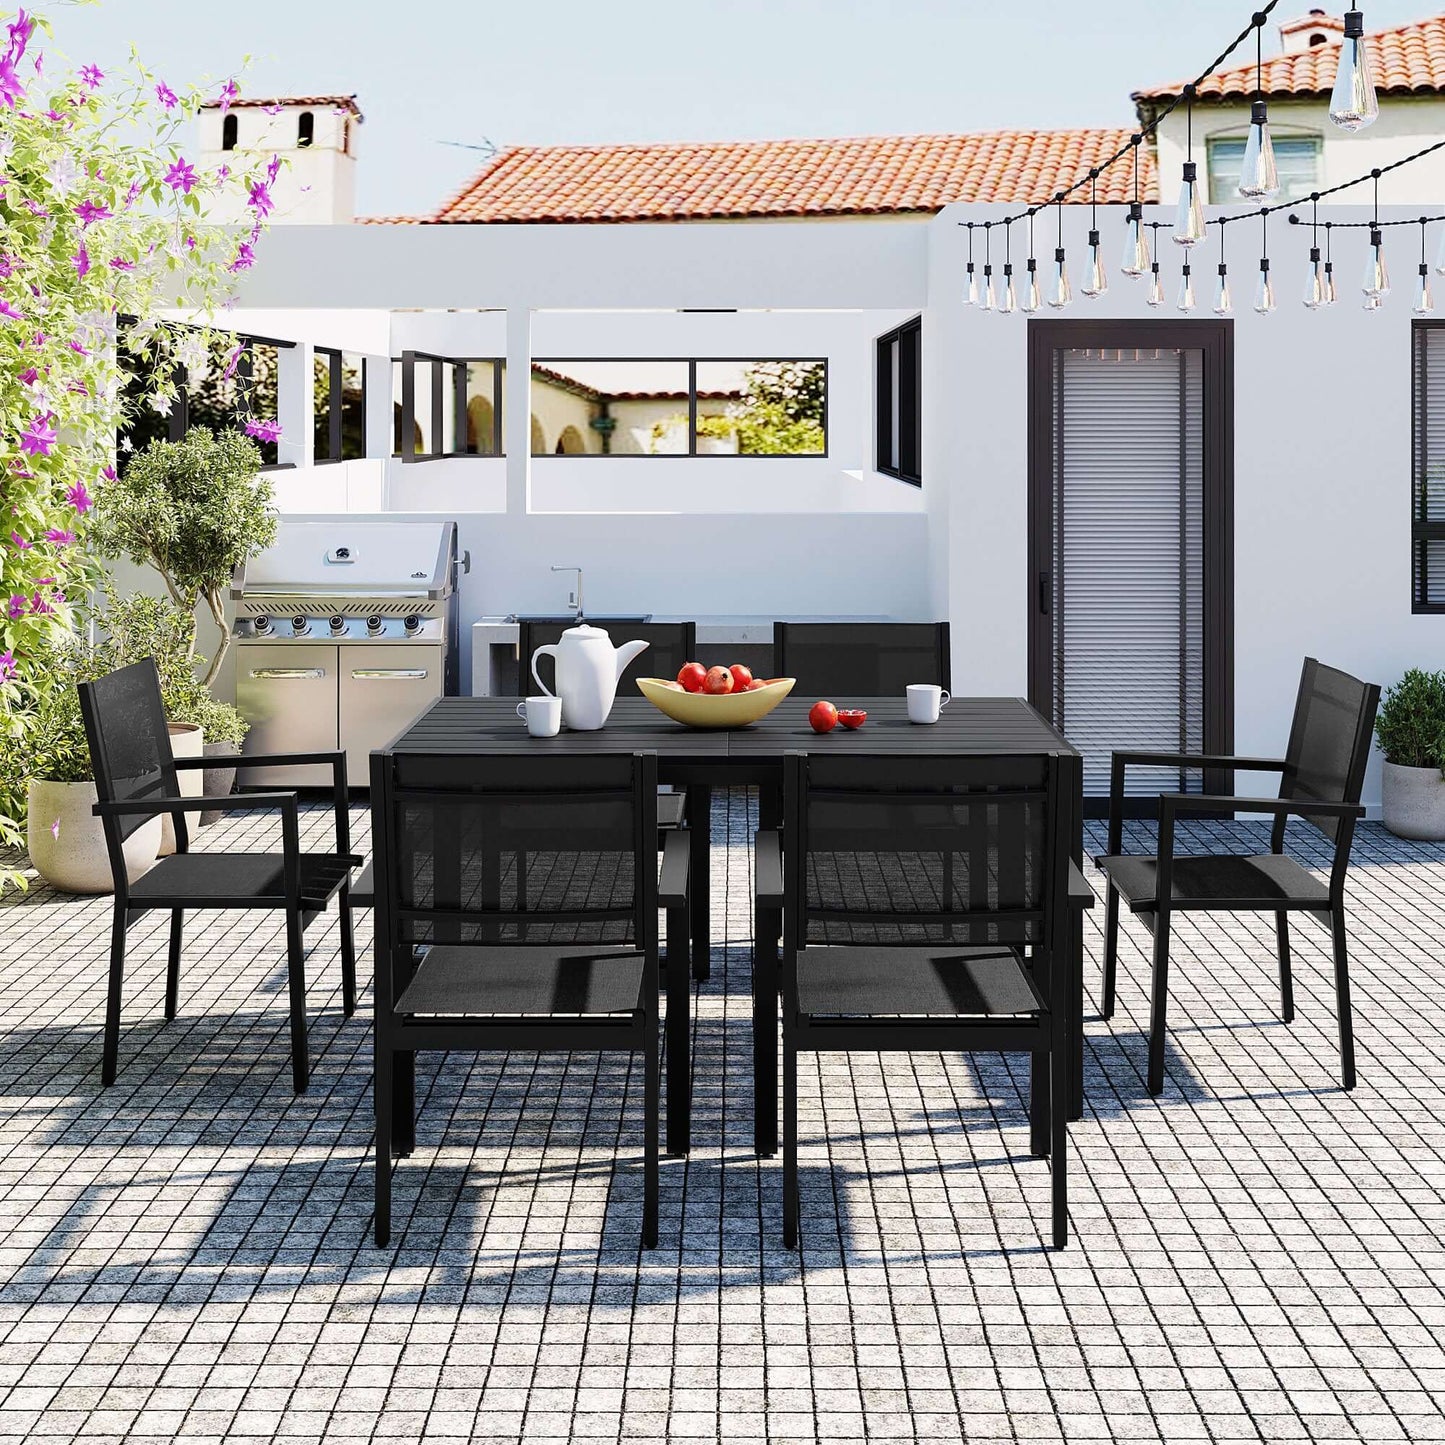 Outdoor patio with U-Style high-quality steel table and chairs set for six, black color, including decorative plants and string lights.